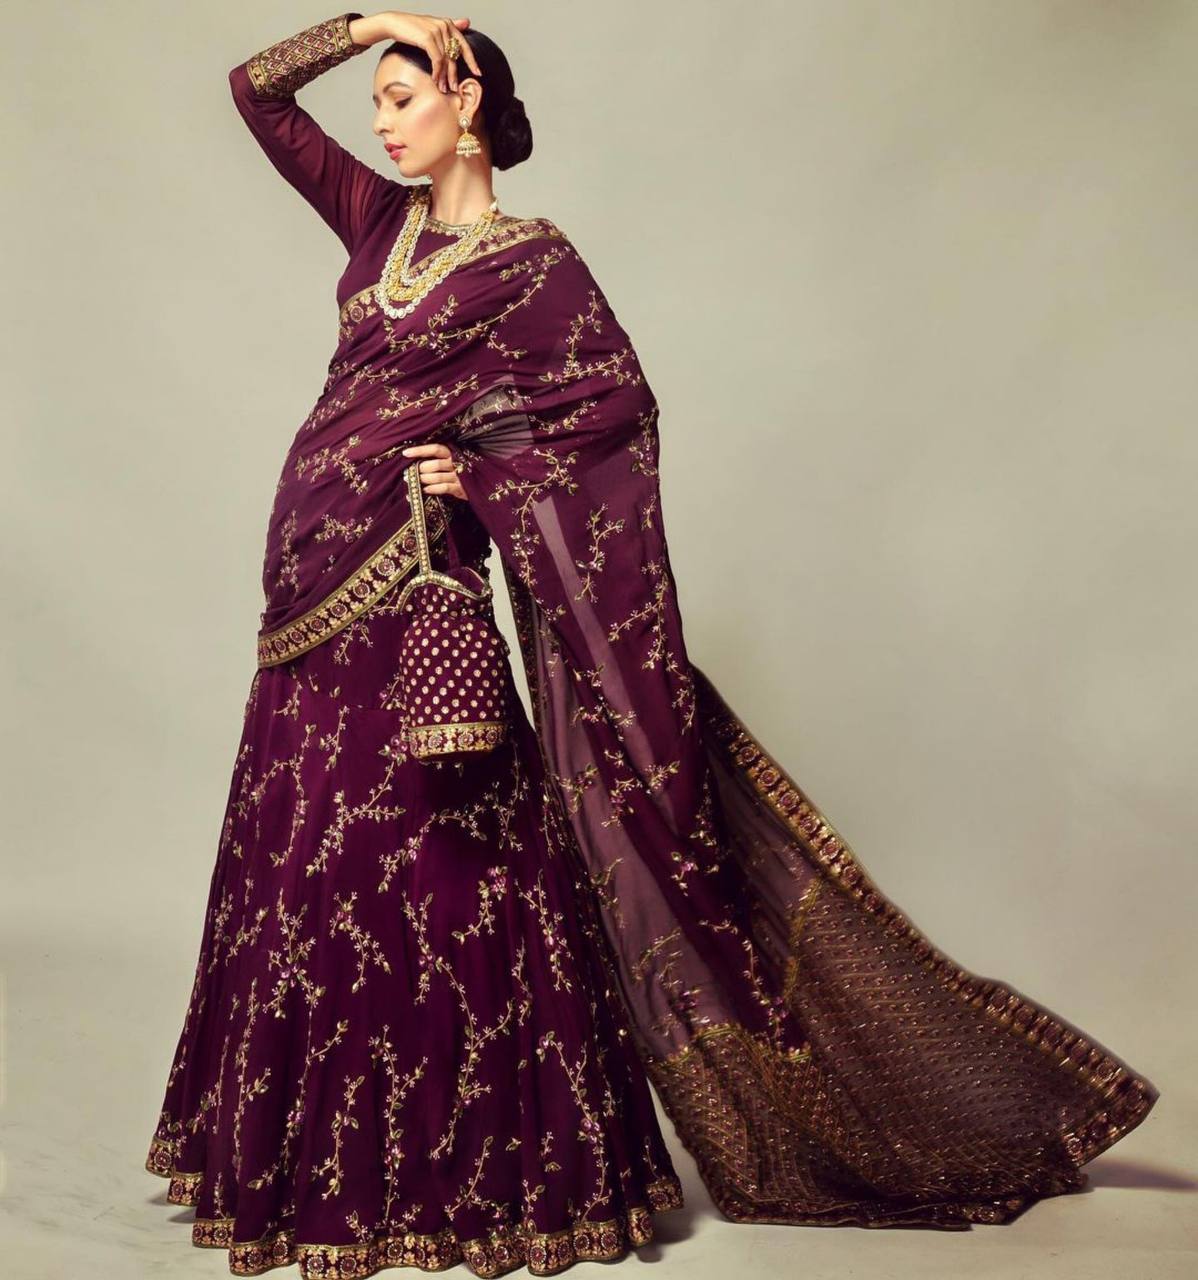 Top styles of ready to wear saree